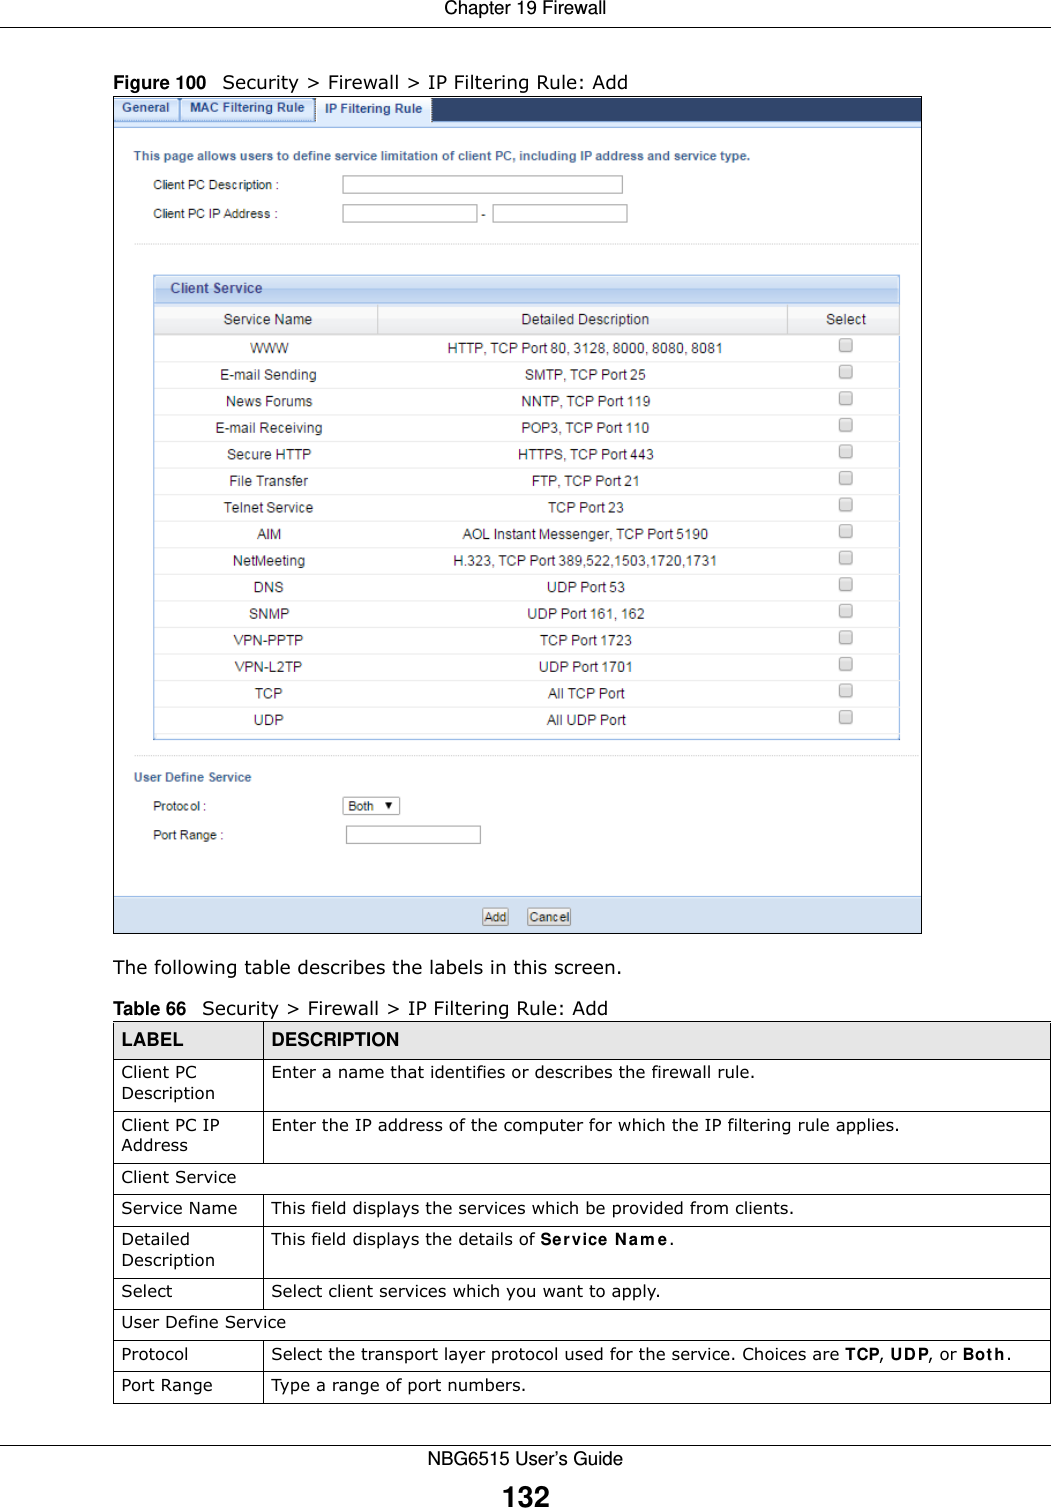 Chapter 19 FirewallNBG6515 User’s Guide132Figure 100   Security &gt; Firewall &gt; IP Filtering Rule: Add The following table describes the labels in this screen.Table 66   Security &gt; Firewall &gt; IP Filtering Rule: AddLABEL DESCRIPTIONClient PC DescriptionEnter a name that identifies or describes the firewall rule.Client PC IP Address Enter the IP address of the computer for which the IP filtering rule applies.Client ServiceService Name This field displays the services which be provided from clients.Detailed DescriptionThis field displays the details of Service Name.Select Select client services which you want to apply.User Define ServiceProtocol  Select the transport layer protocol used for the service. Choices are TCP, UDP, or Both.Port Range Type a range of port numbers.